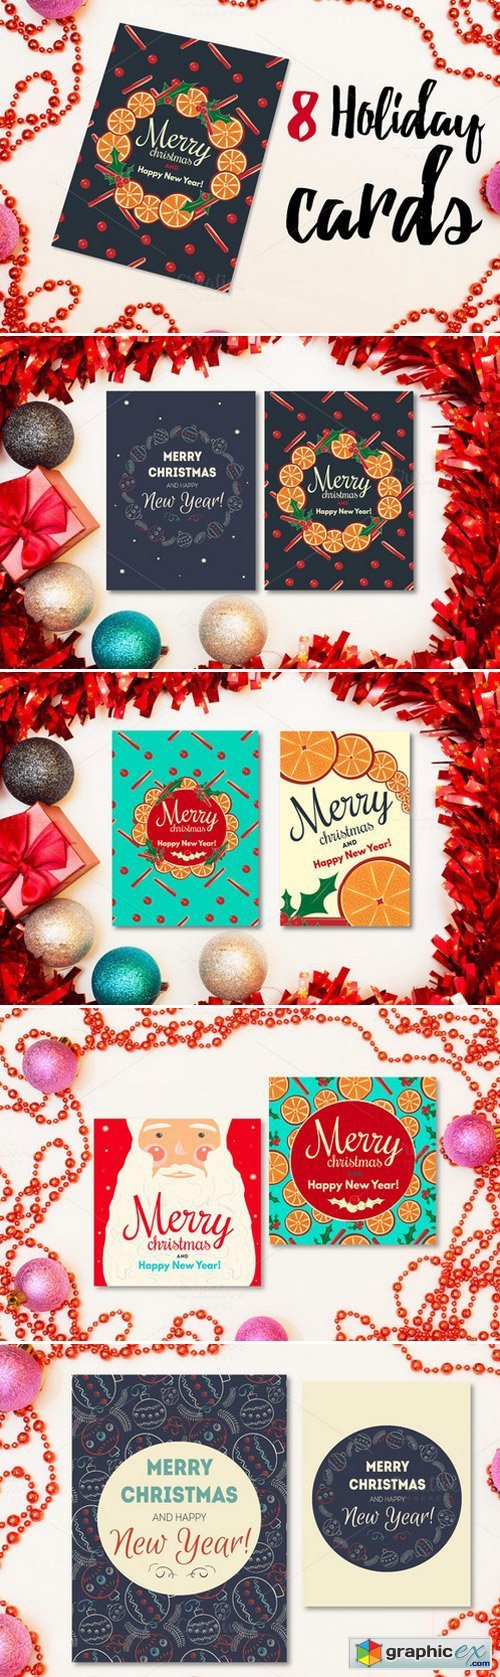 8 holiday cards with 3 patterns